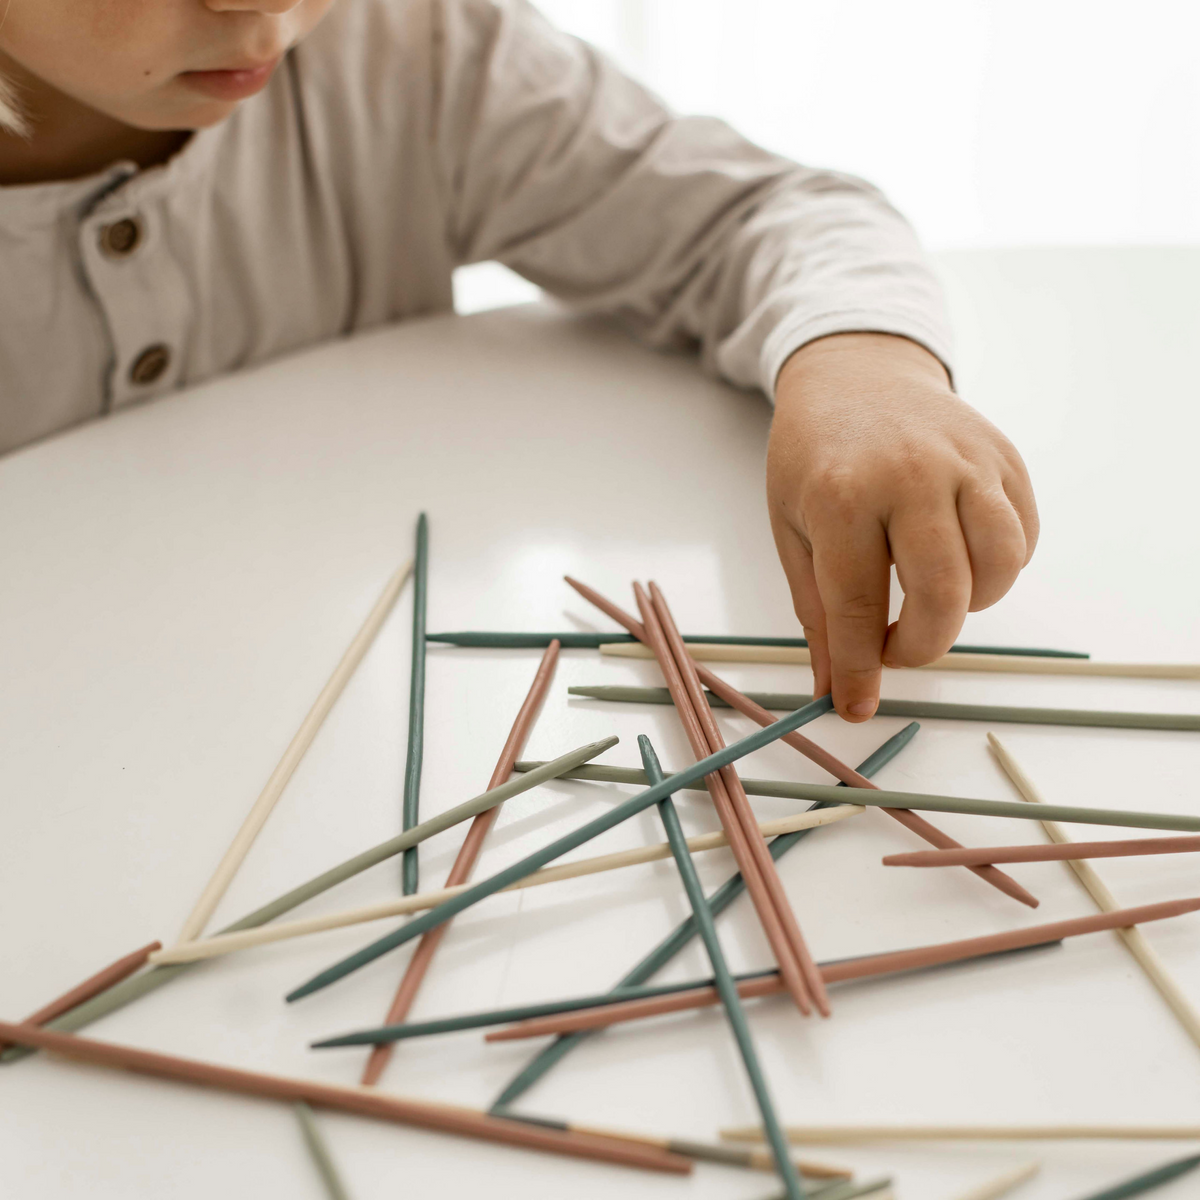 Pick-up Sticks with Pencils—Easy and Fun Back-to-School Game